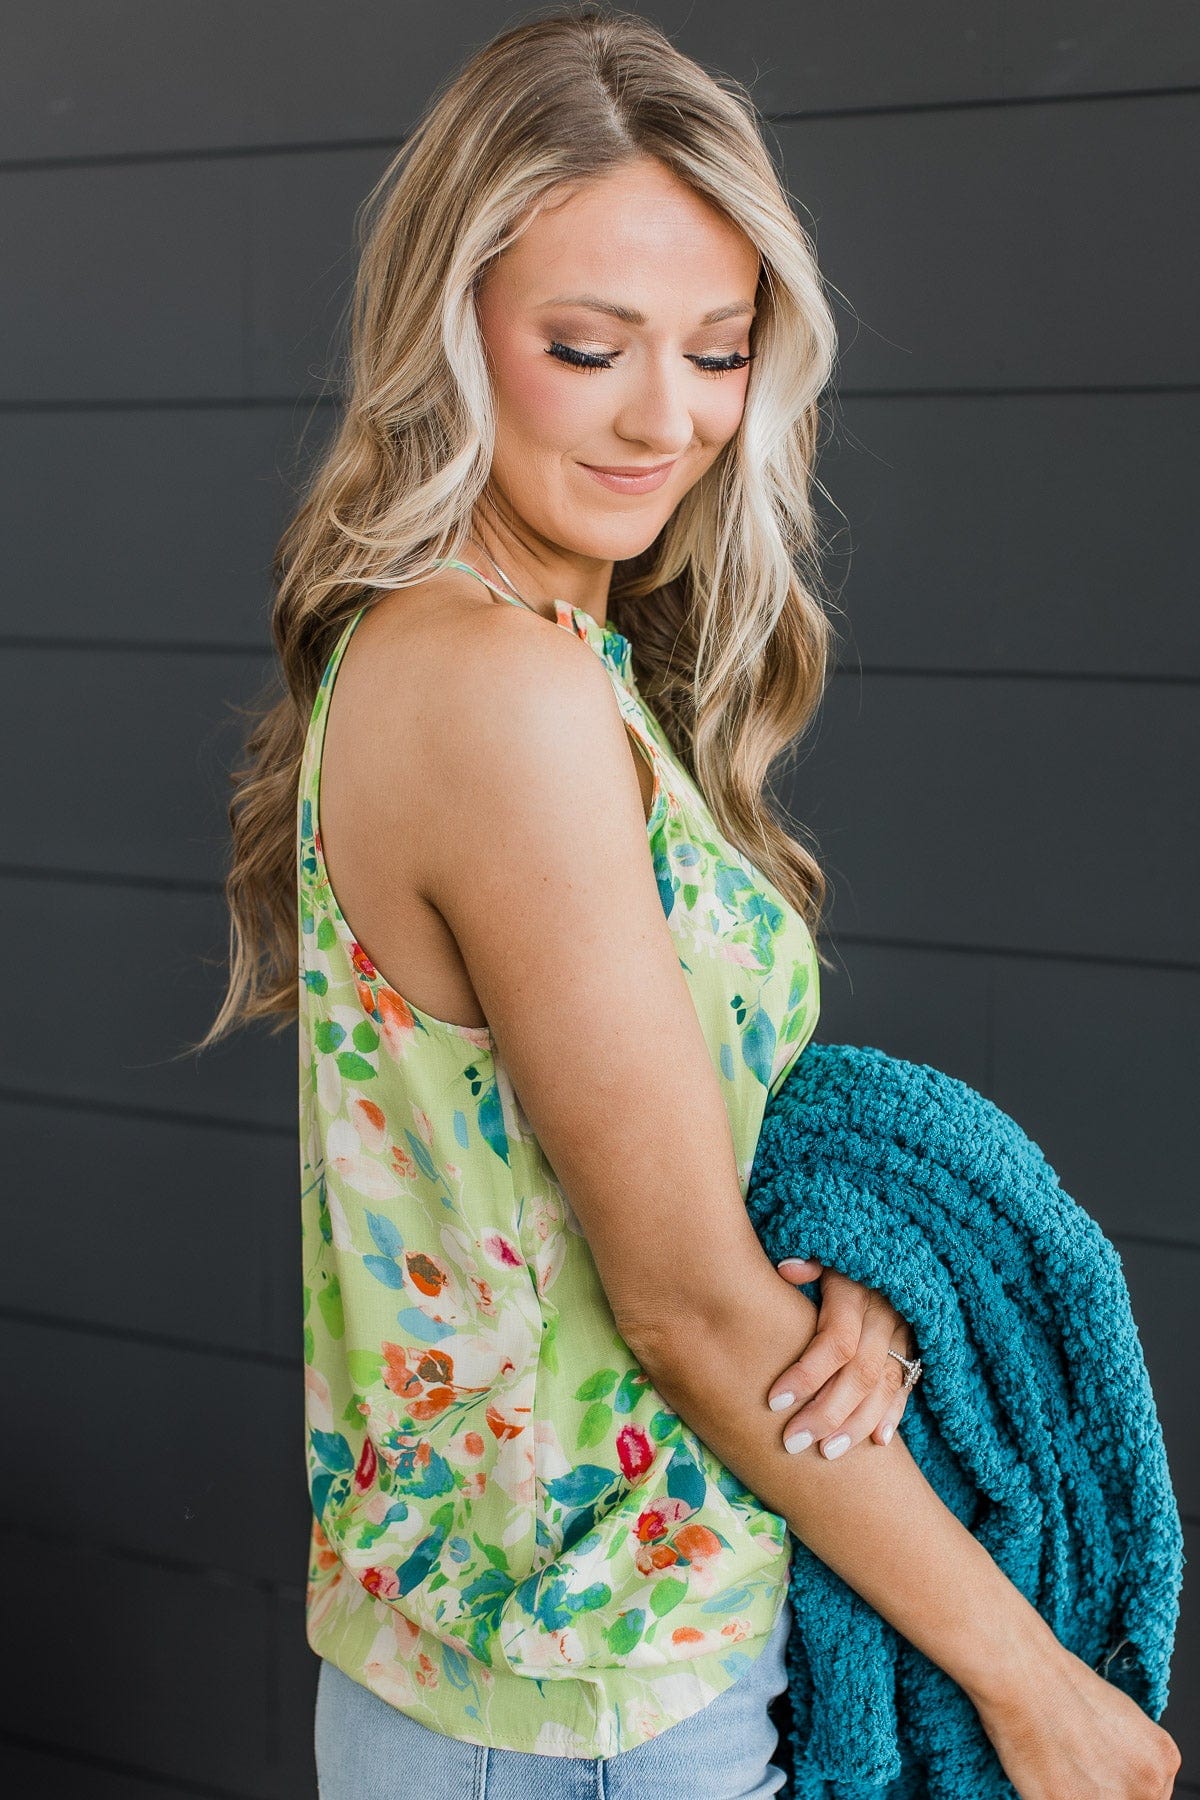 Watch Me Bloom Floral Tank Top- Lime Green